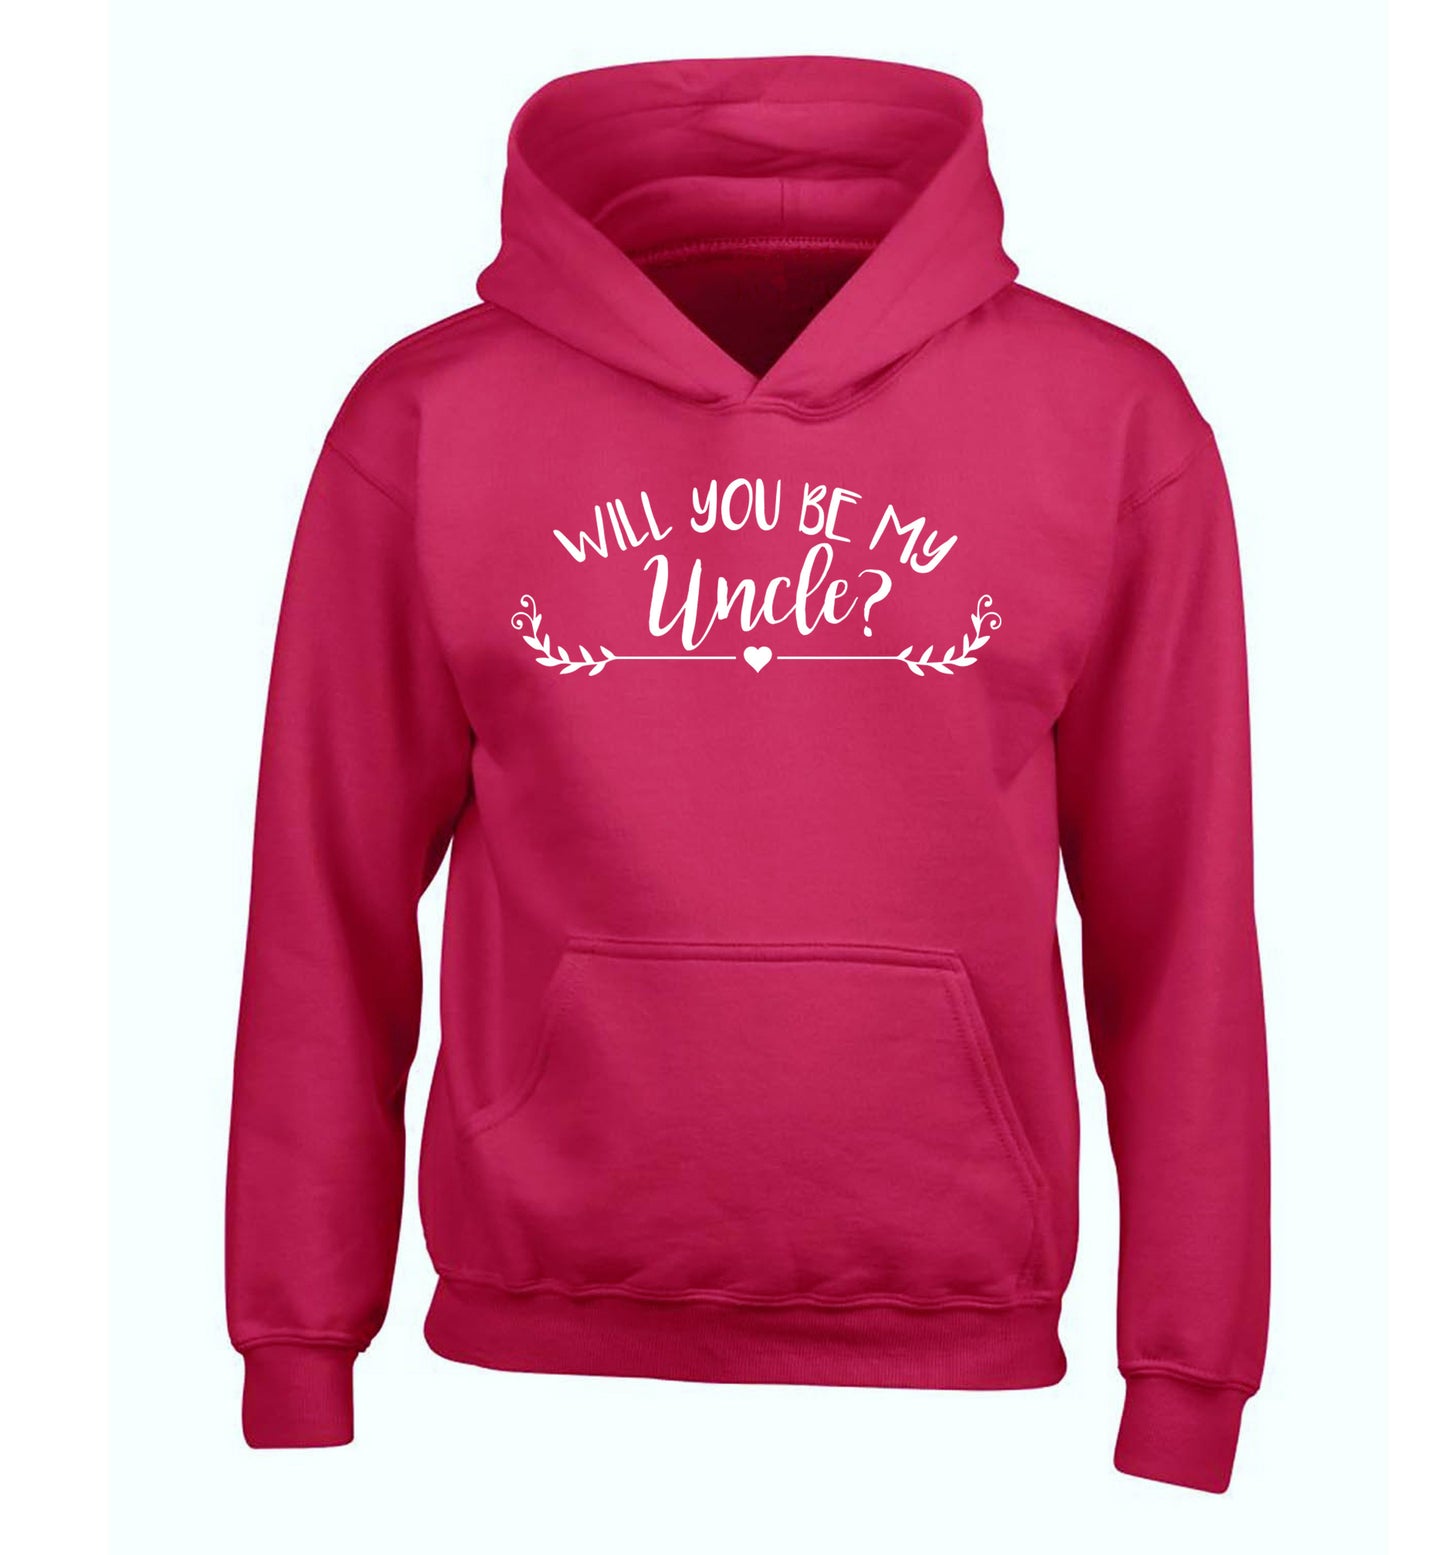 Will you be my uncle? children's pink hoodie 12-14 Years